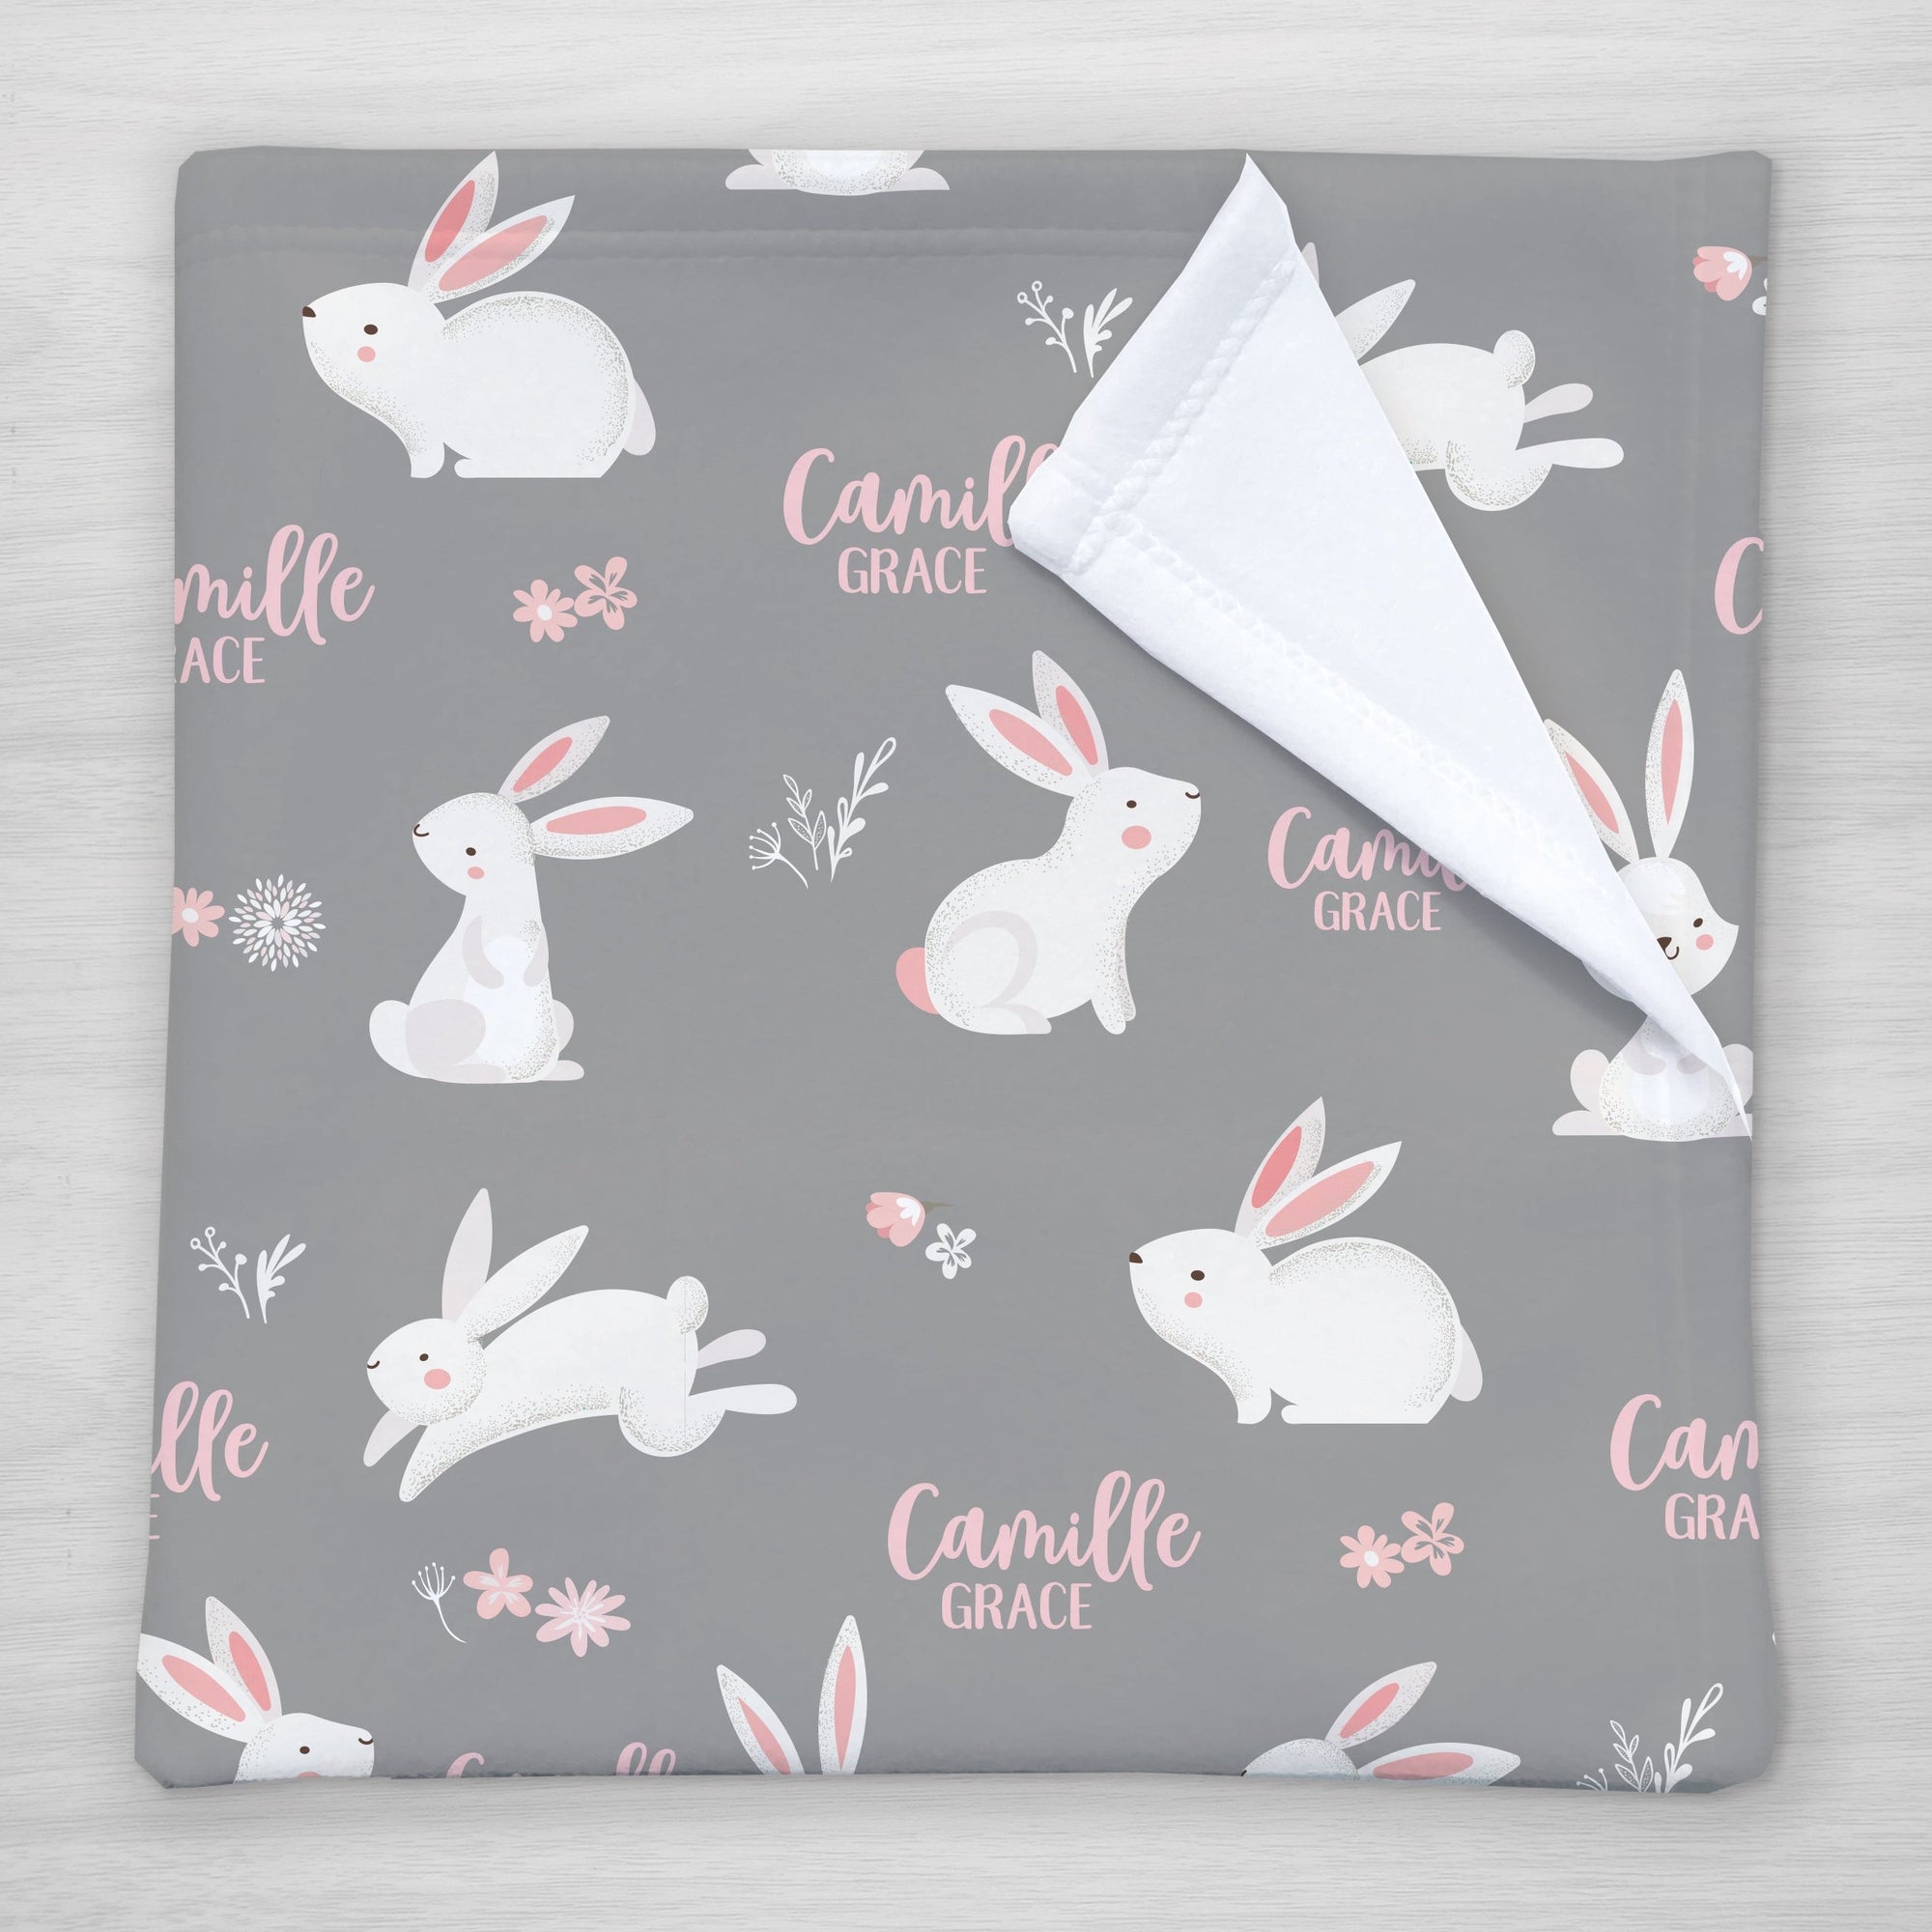 Bunny Rabbit children's blanket, personalized with name. Soft gray fleece background with white and pink accents. Great for babies, toddlers, or older kids